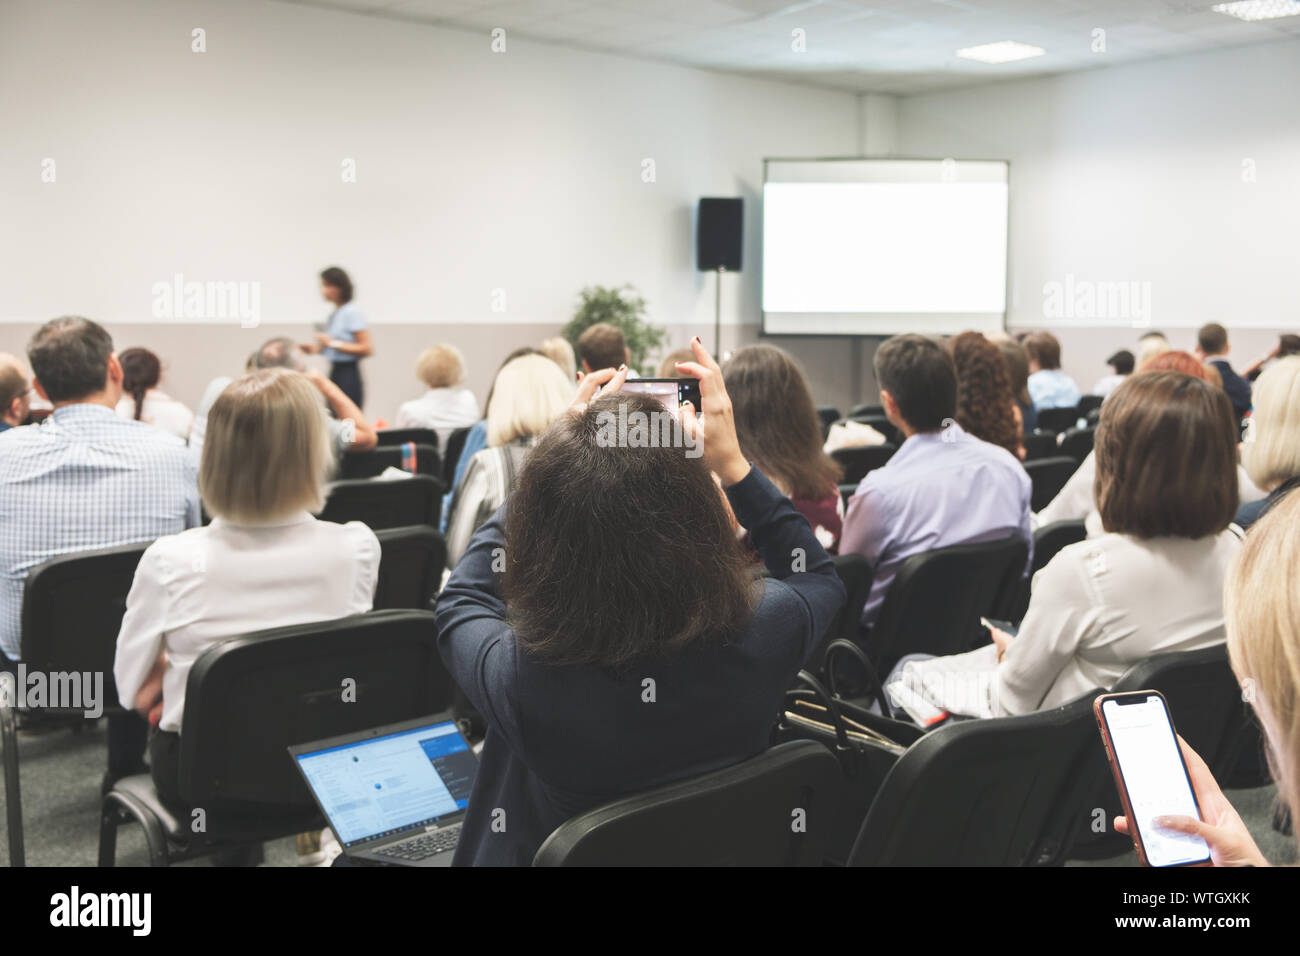 Business woman and people Listening on The Conference. Horizontal Image Stock Photo